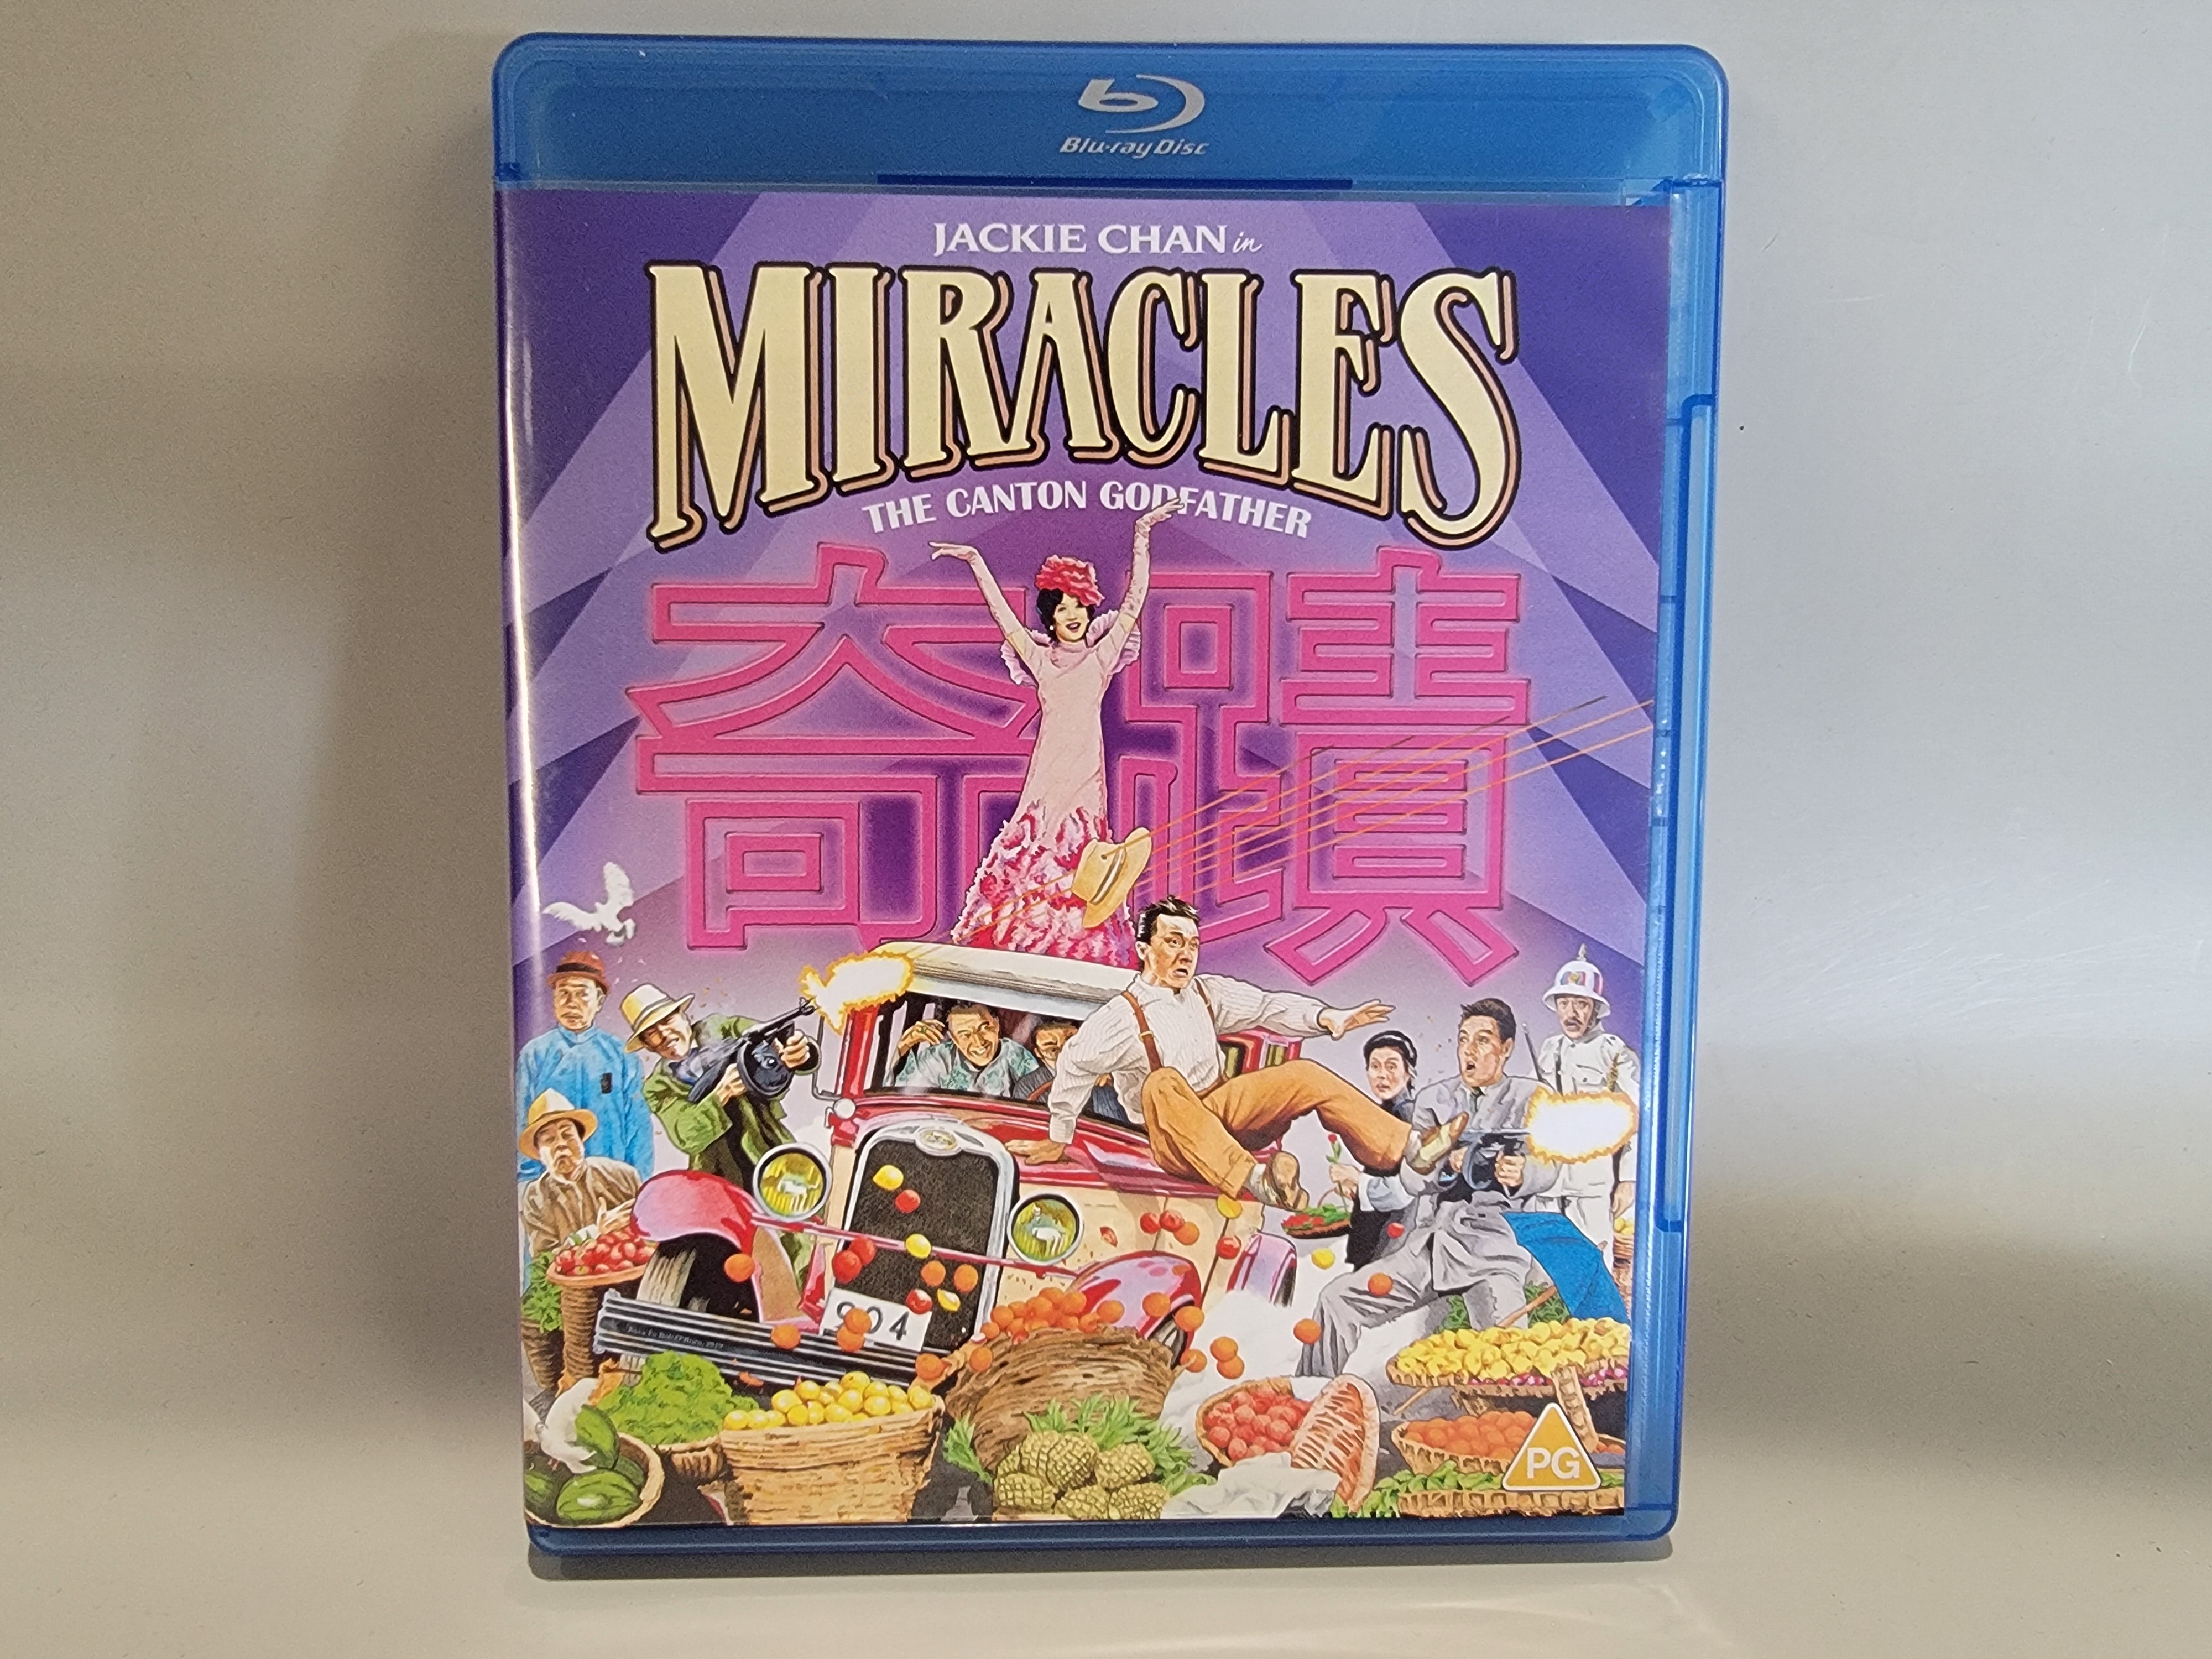 MIRACLES: THE CANTON GODFATHER (REGION B IMPORT) BLU-RAY [USED]